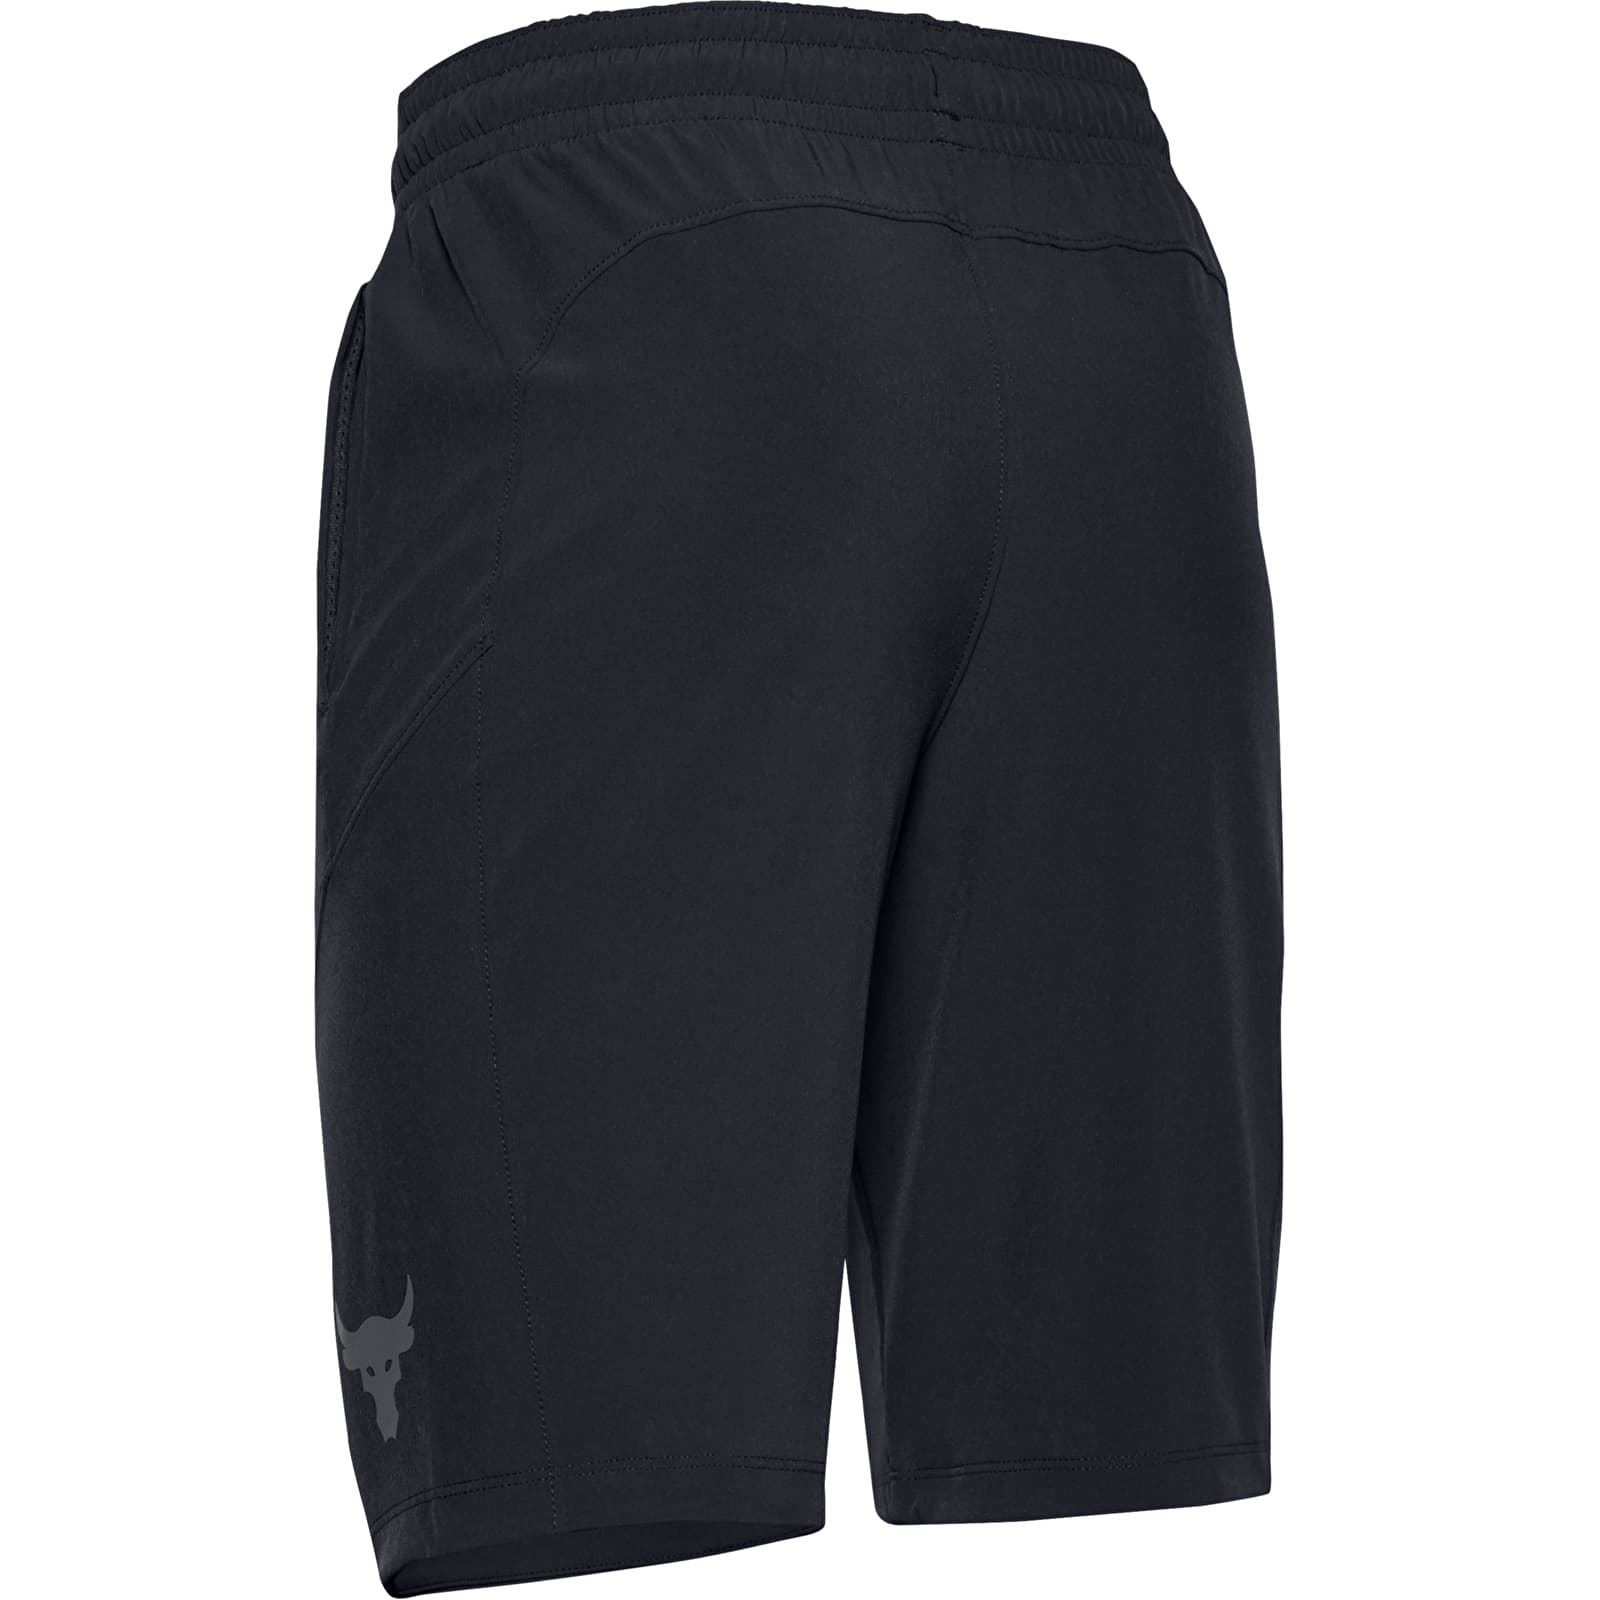 Shorts Under Armour Project Rock Y Utility Shorts Black